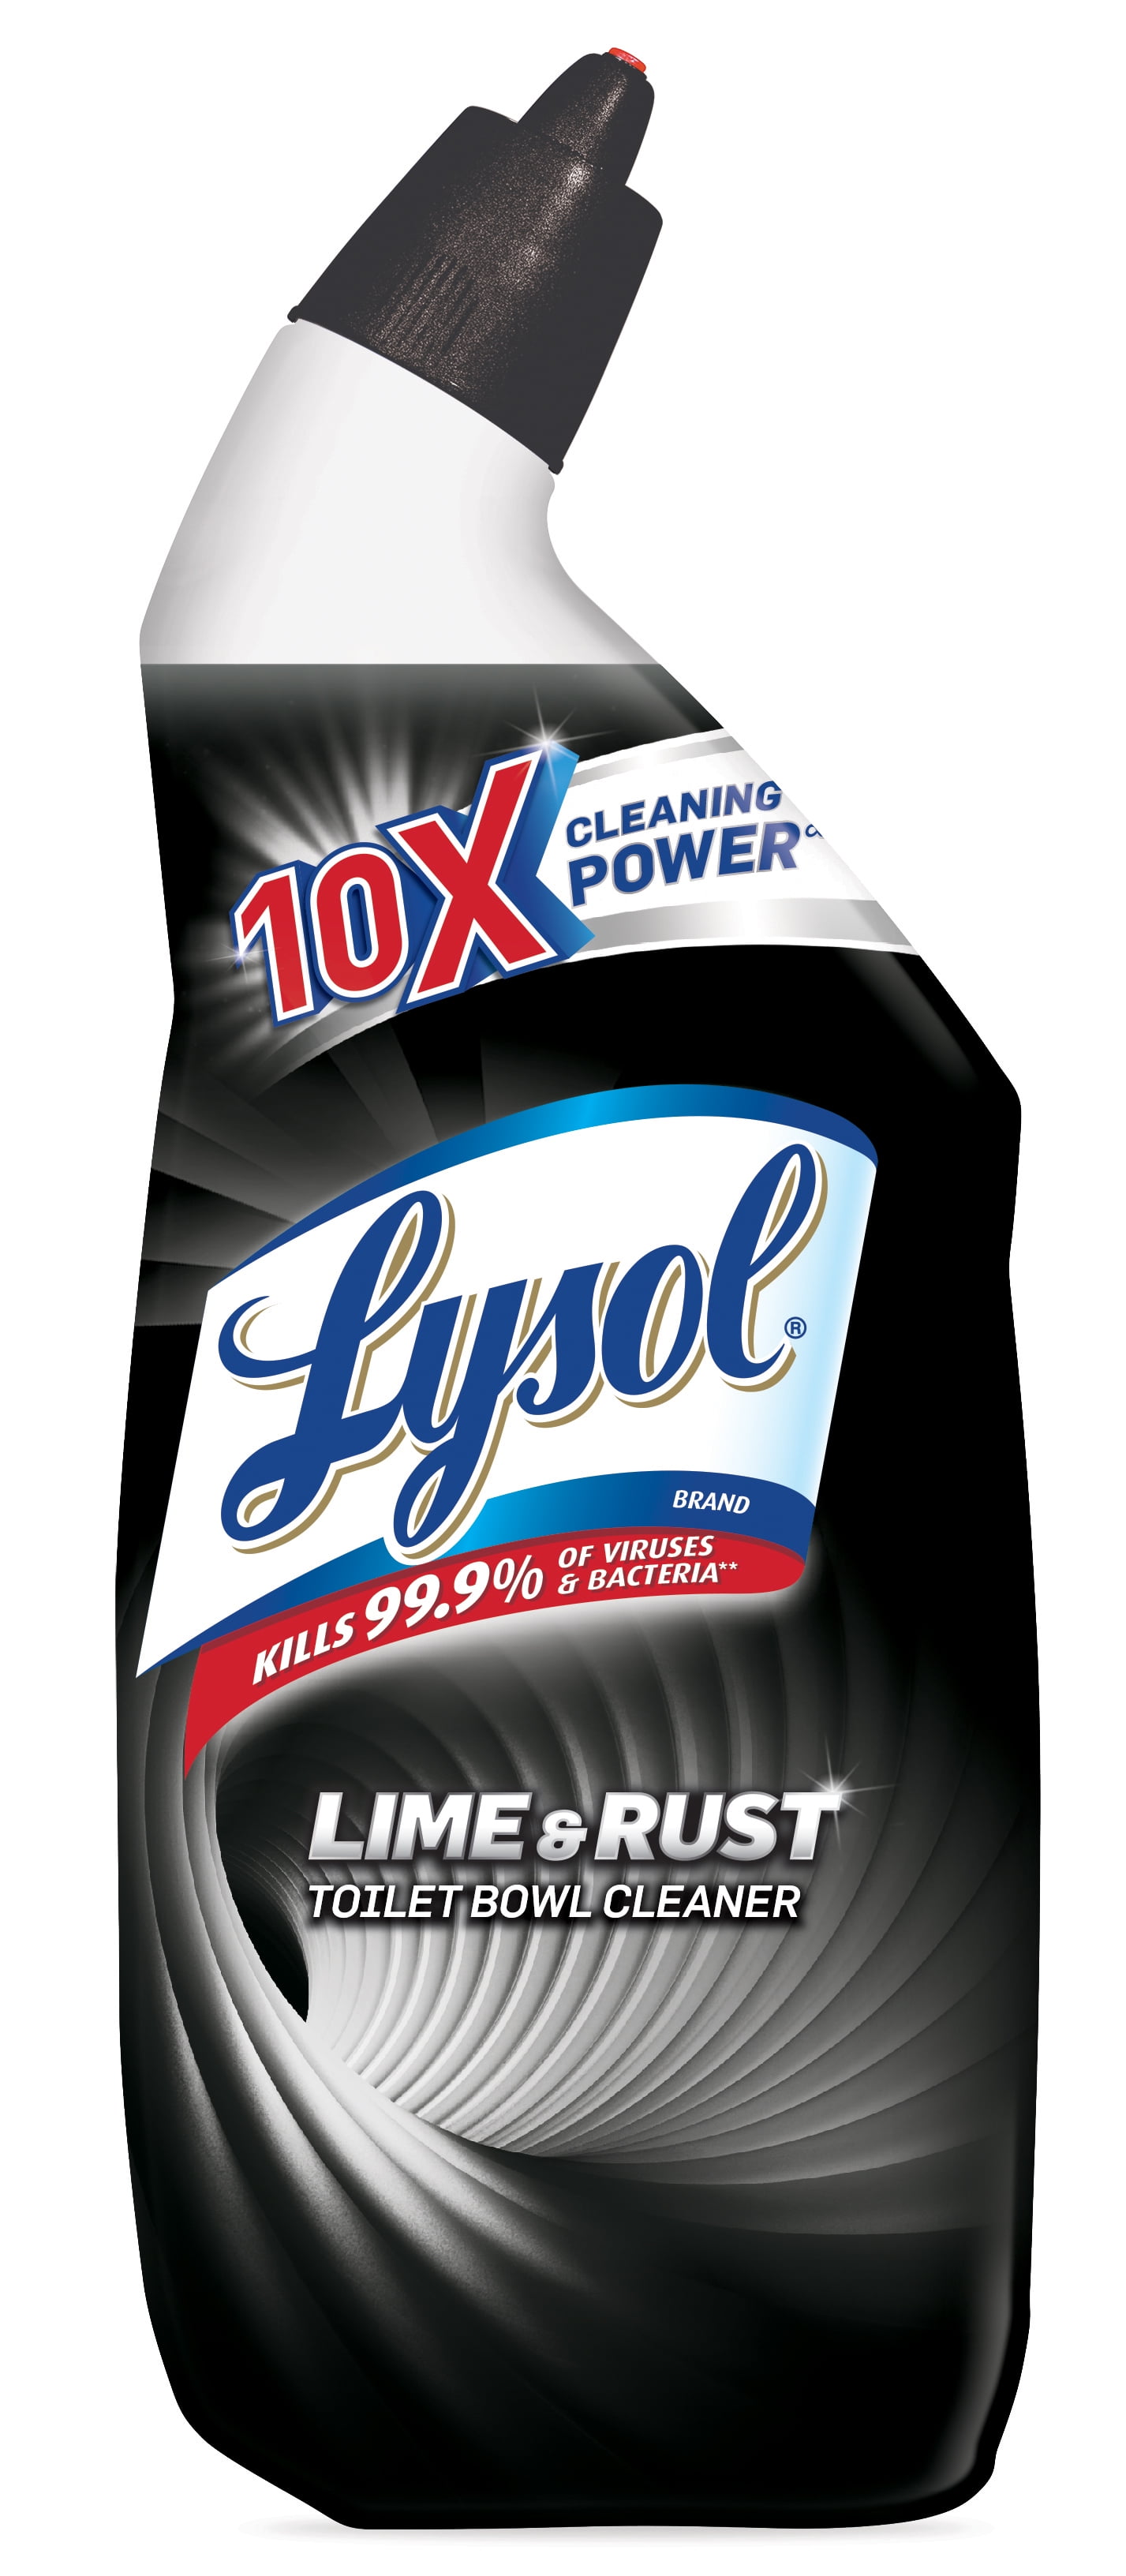 Lysol Toilet Bowl Cleaner Gel, for Cleaning and and Disinfecting, Removes Lime and Rust, 24oz